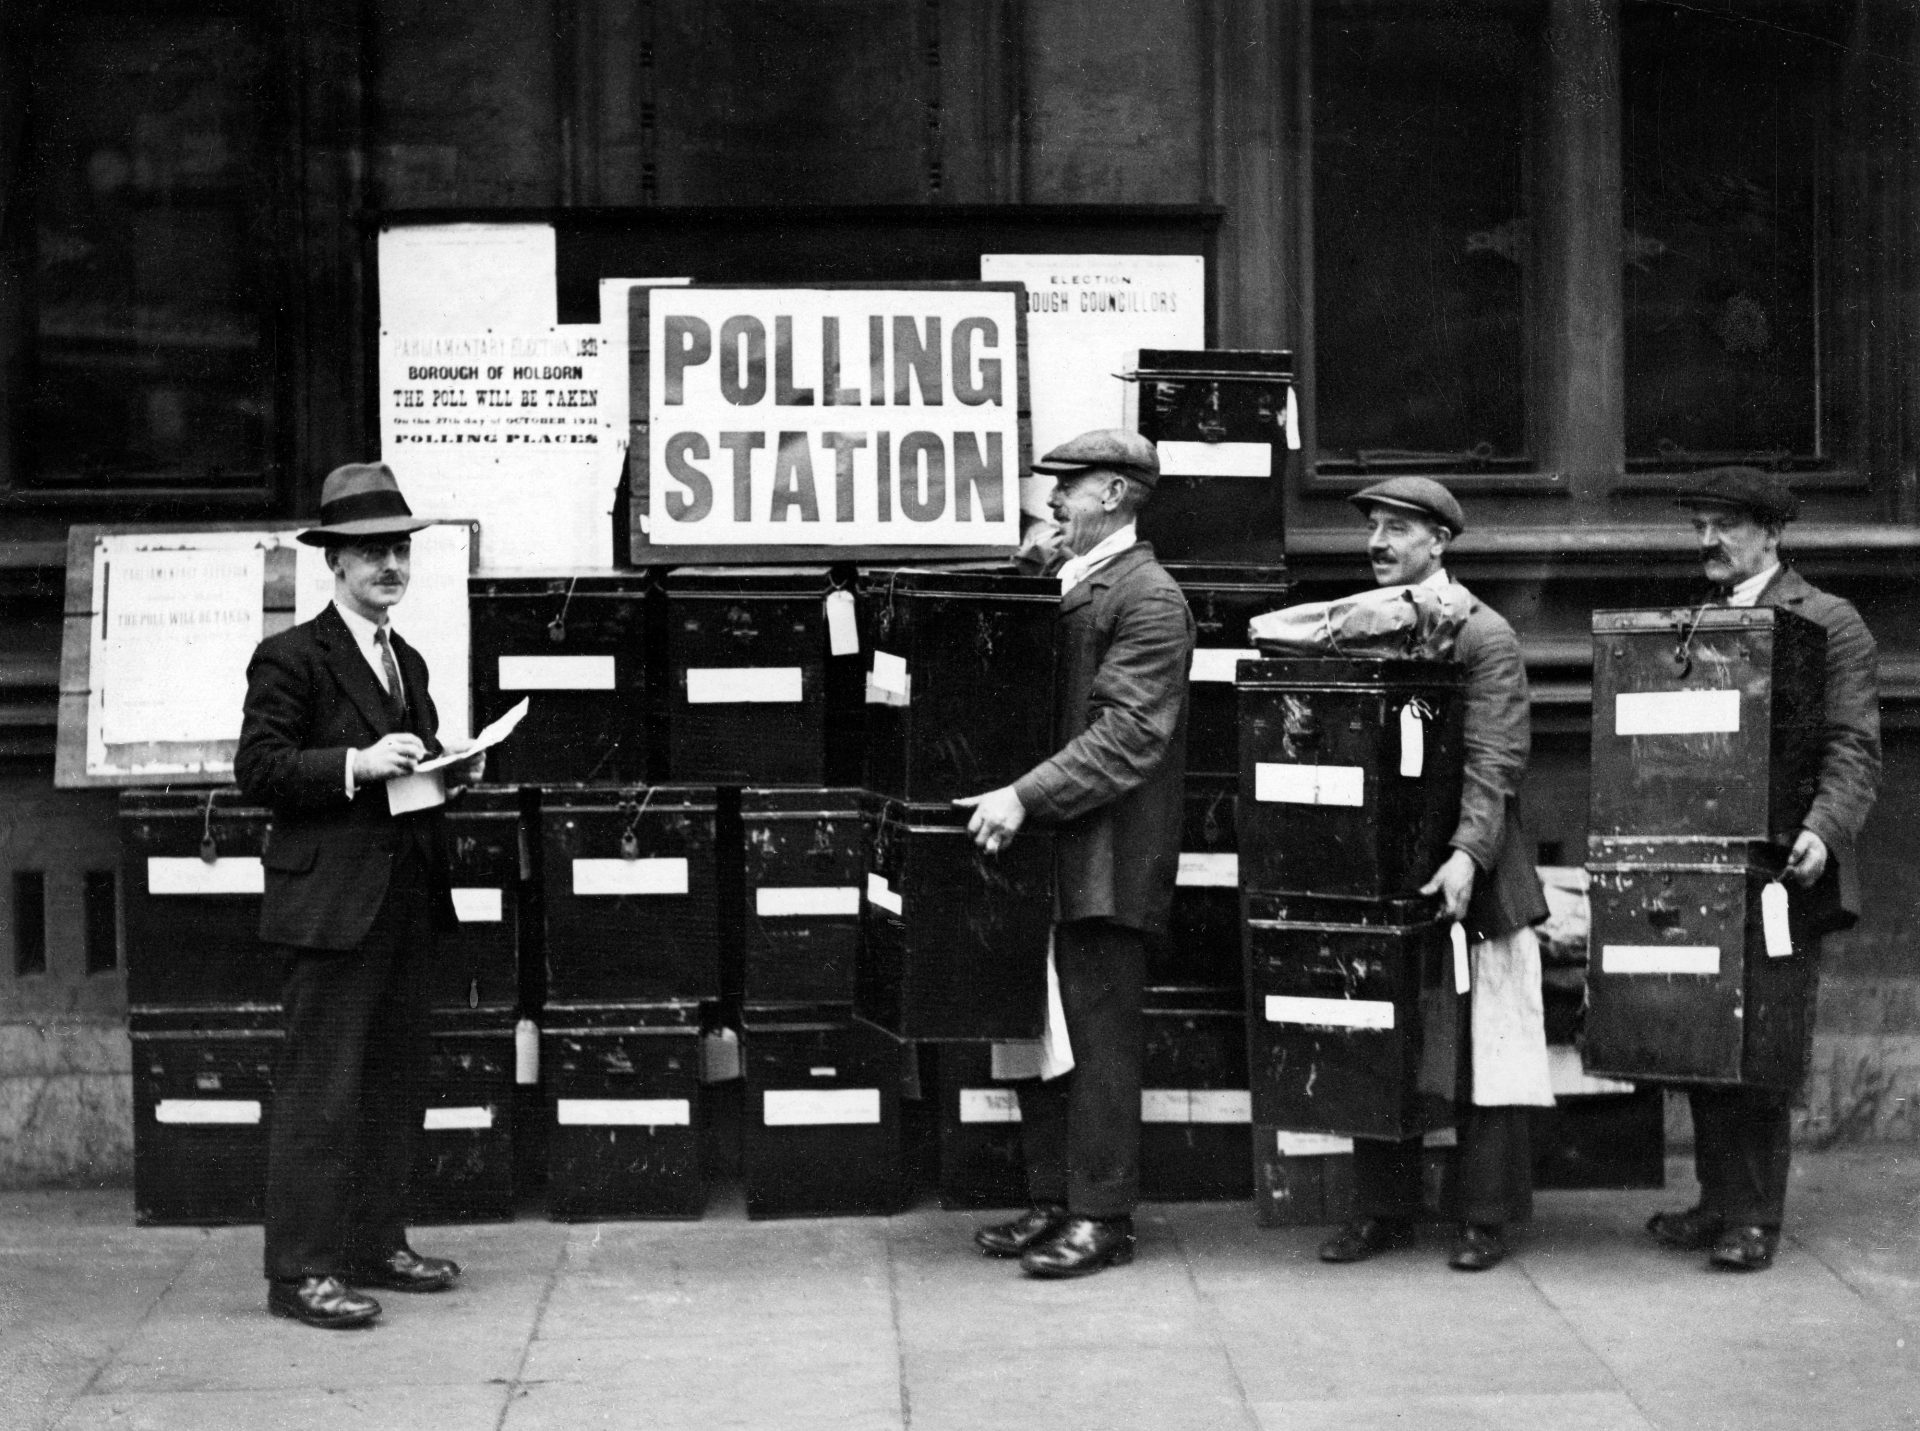 The way we used to vote: Officials pile up ballot boxes during counting for the 1931 UK general election. Photo: Keystone France/Gamma-Rapho via Getty